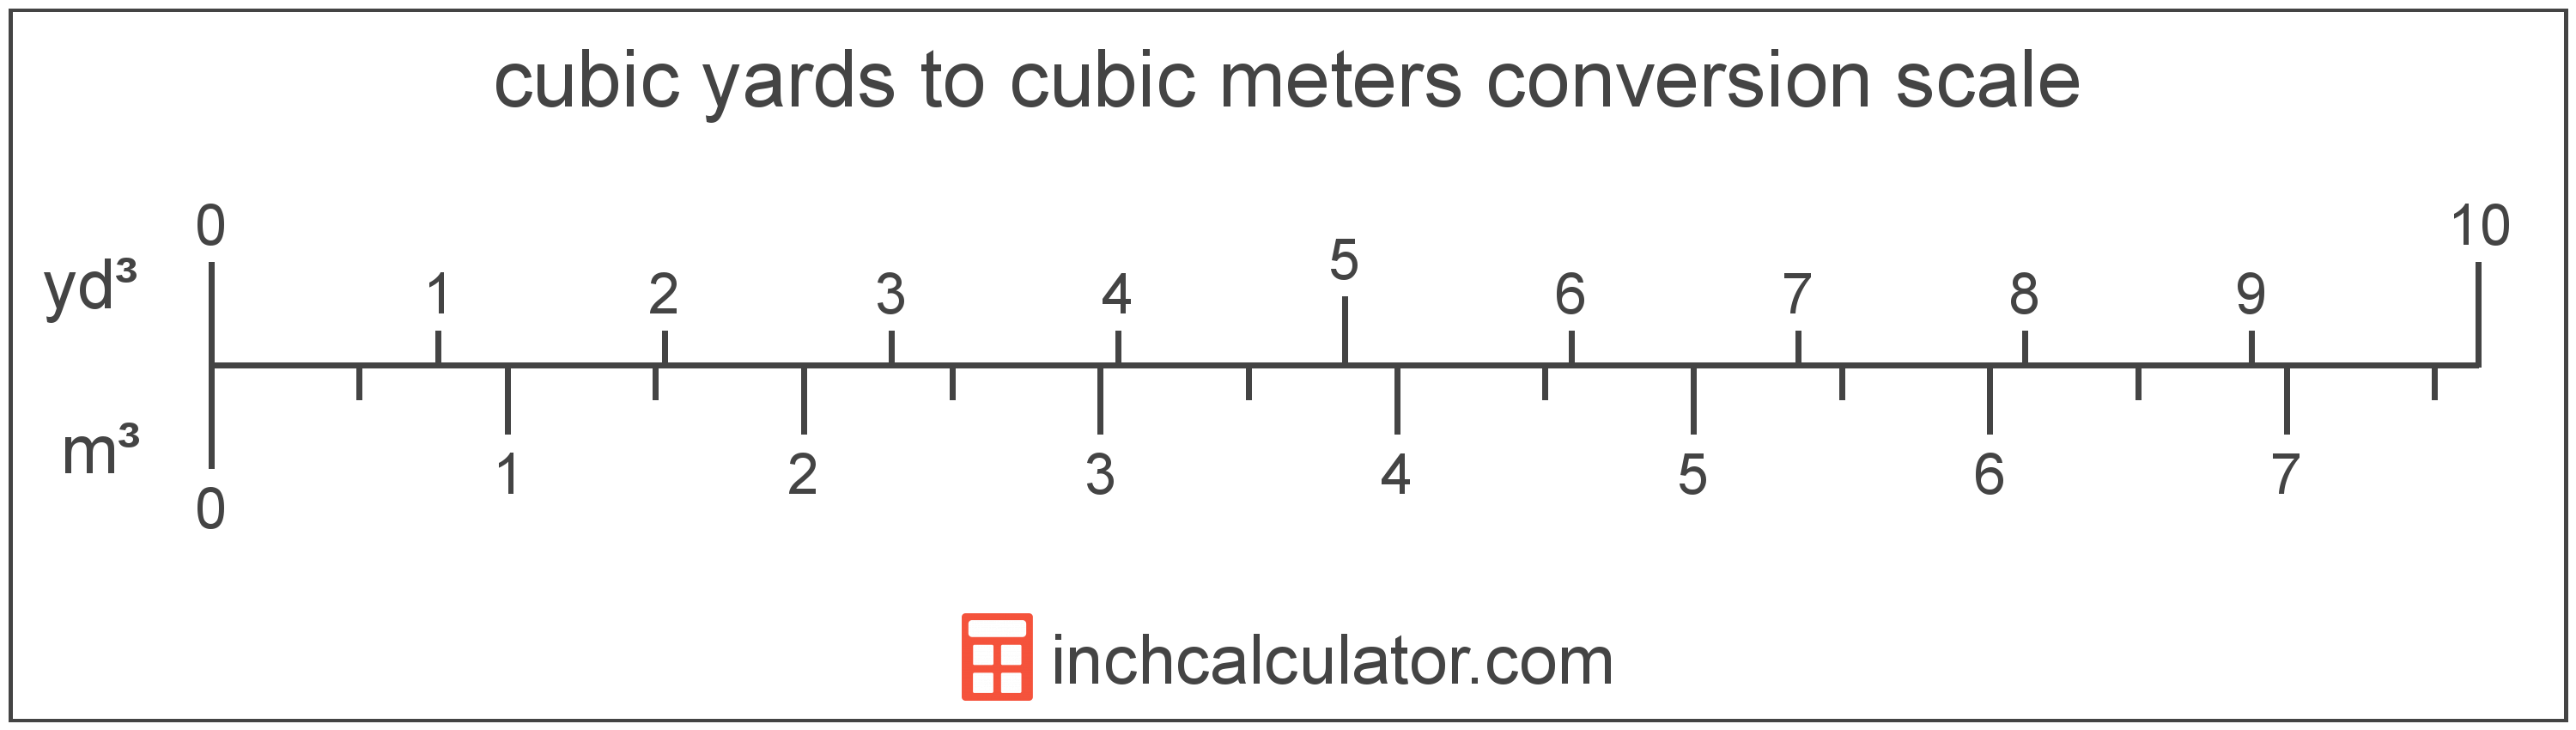 cubic-meters-to-cubic-yards-conversion-m-to-yd